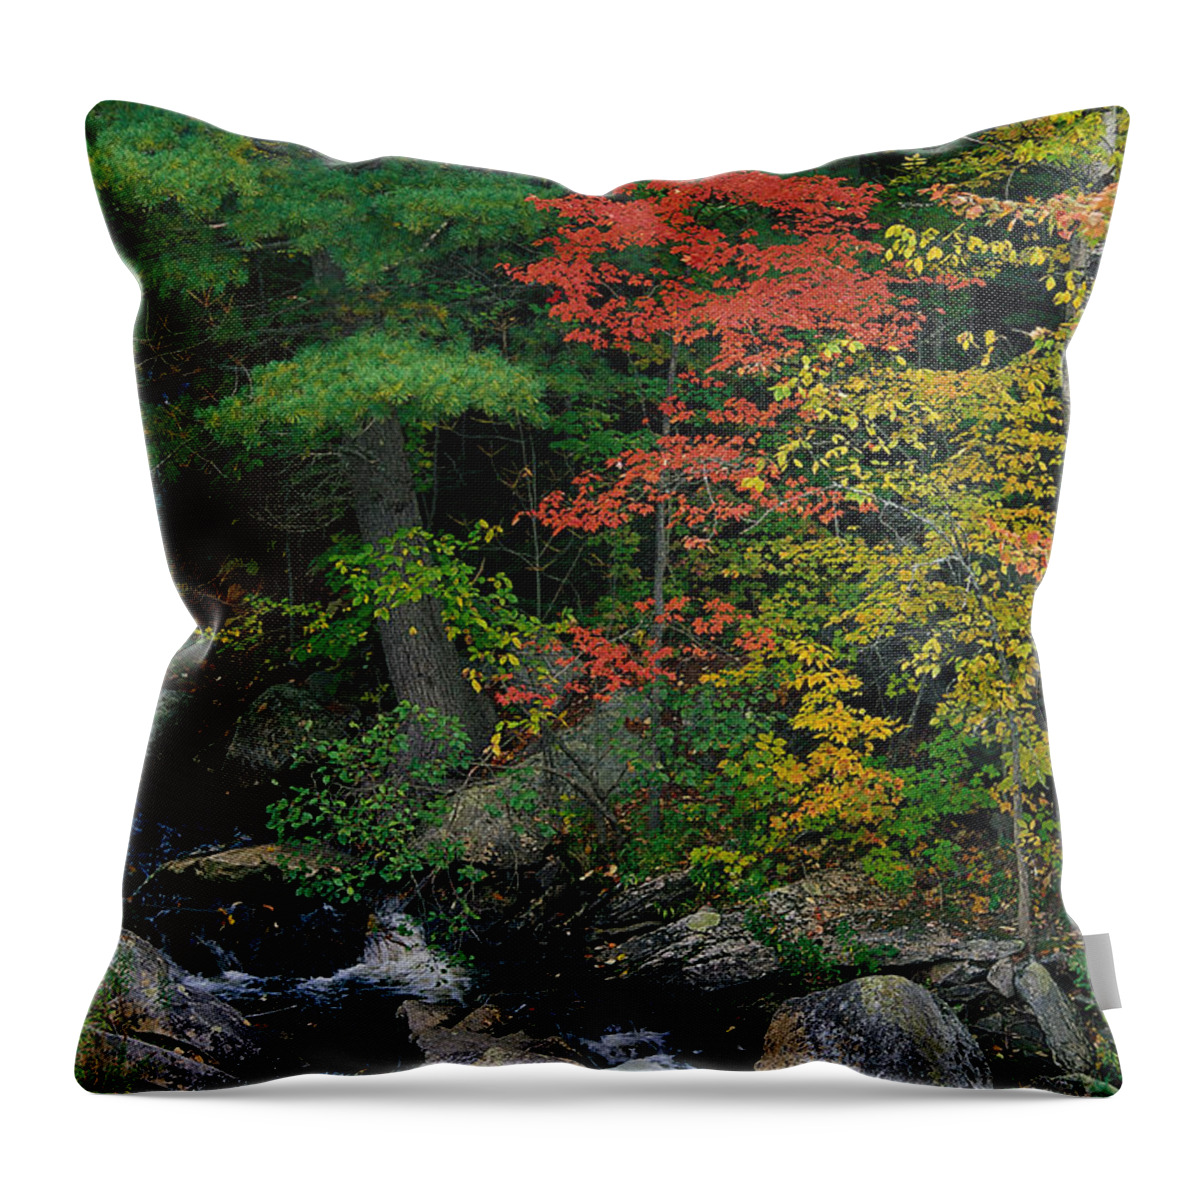 Scenics Throw Pillow featuring the photograph Liqas092 Fall Scenic, Acadia Np, Maine by Elizabeth Delaney